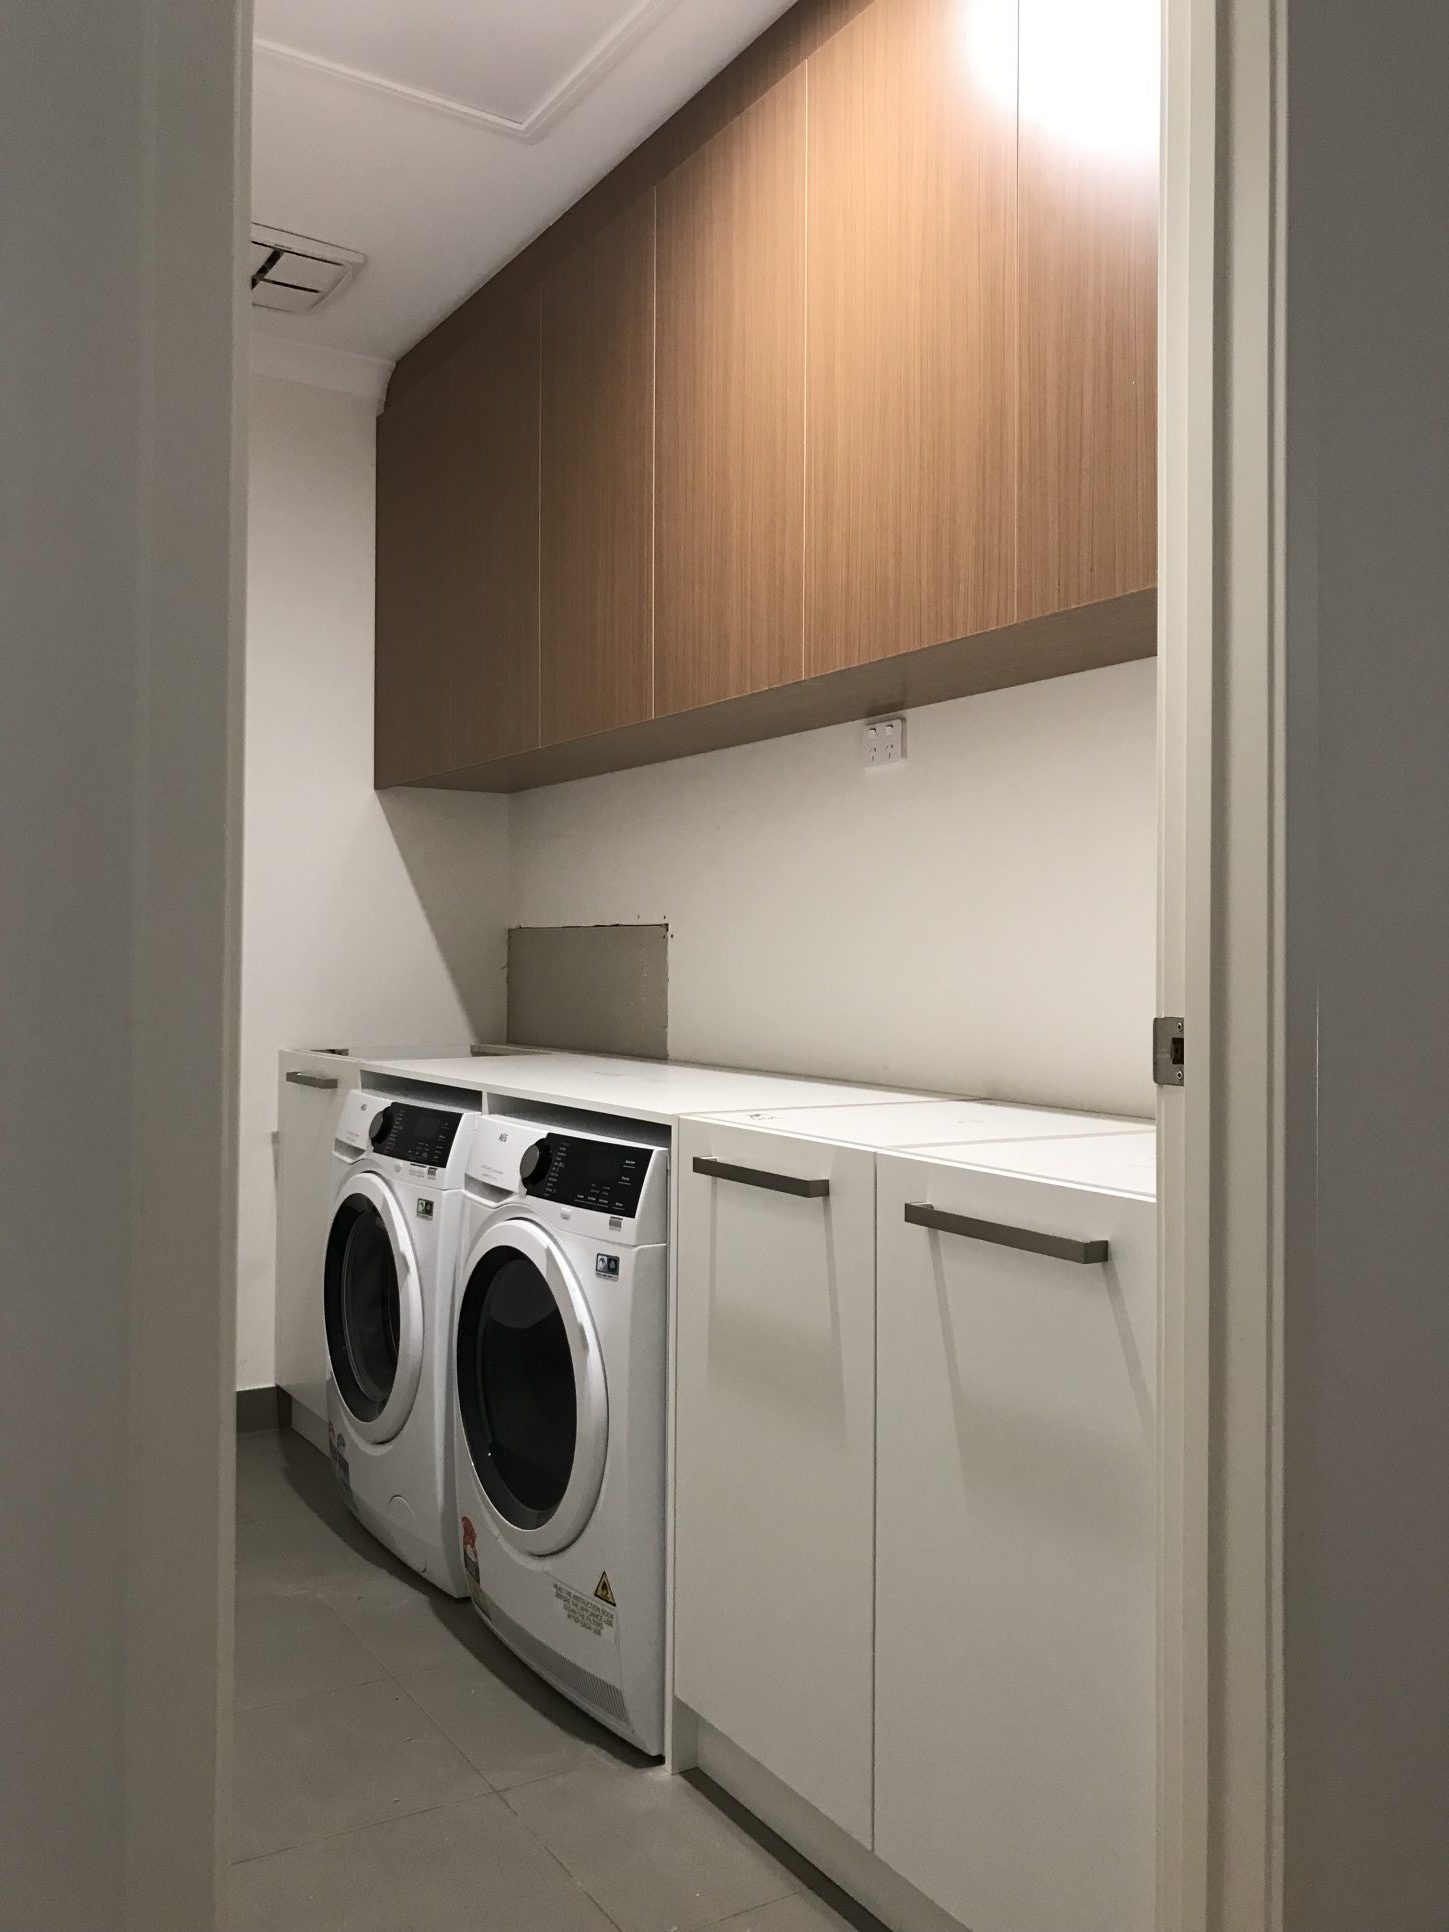 Officer-Bathroom&Laundry2 - anlcabinets